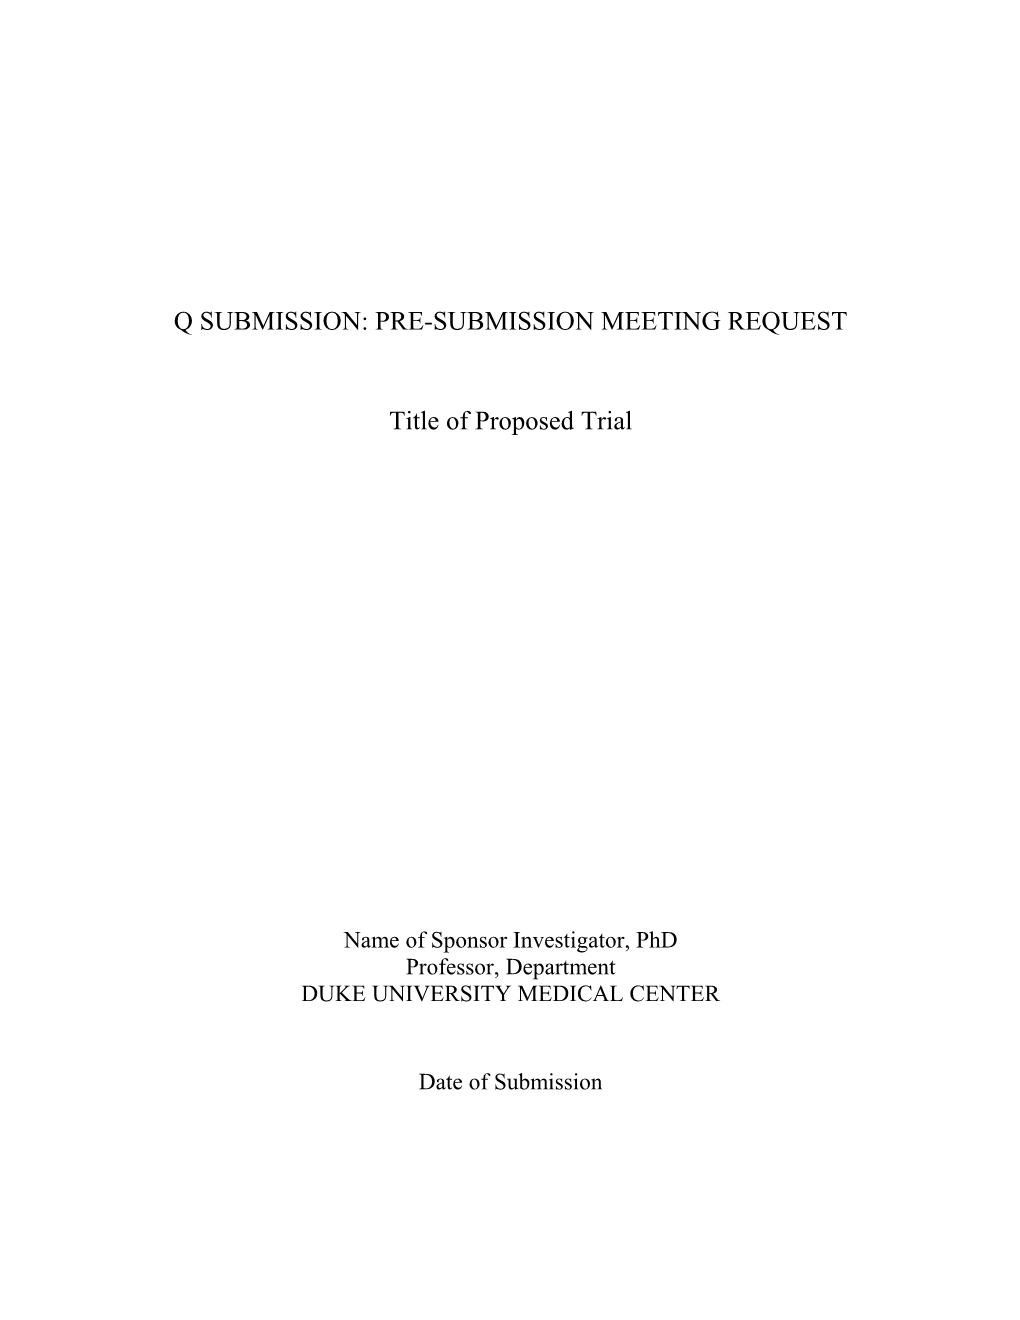 Q Submission: Pre-Submission Meeting Request